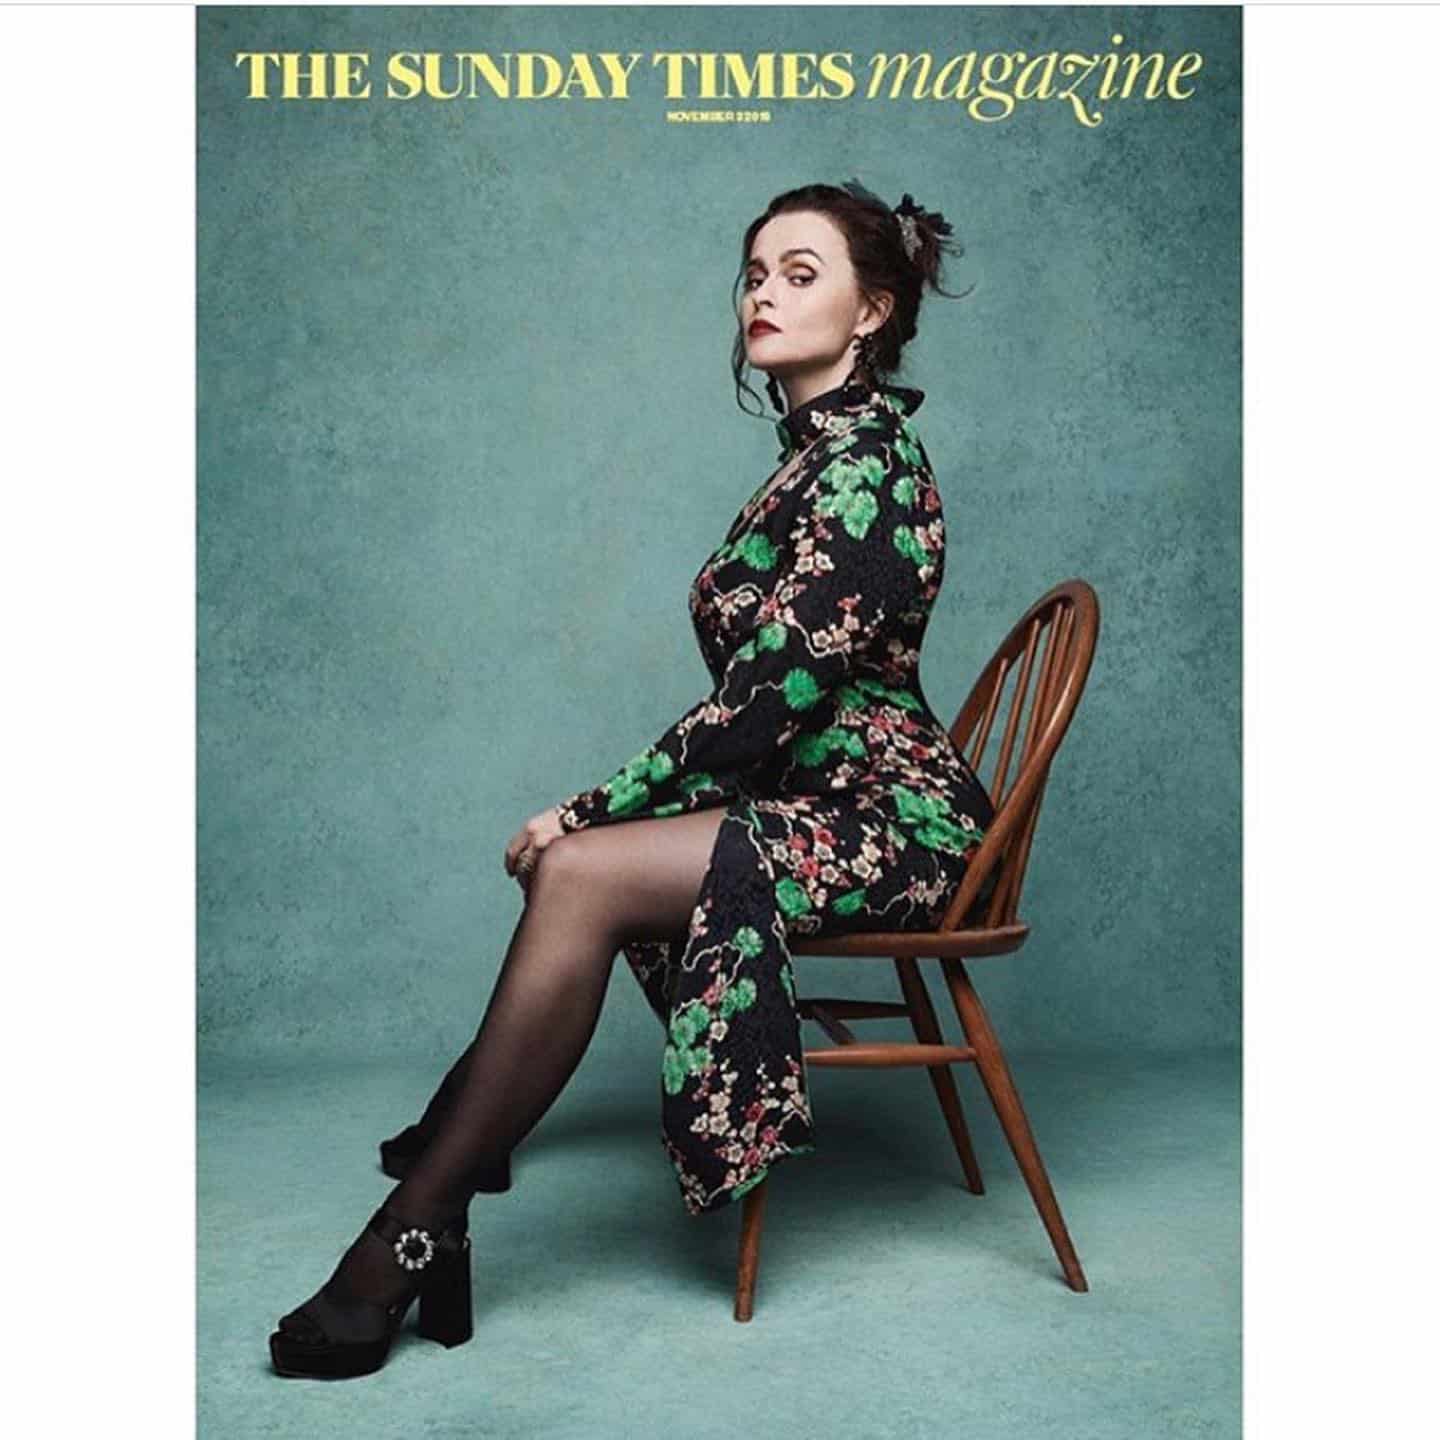 ️ Helena Bonham Carter graces the cover of this weekend’s @thestmagazine discussing her role as Princess Margaret in @thecrownnetflix ️
.
.
📸: @mattholyoak .
.